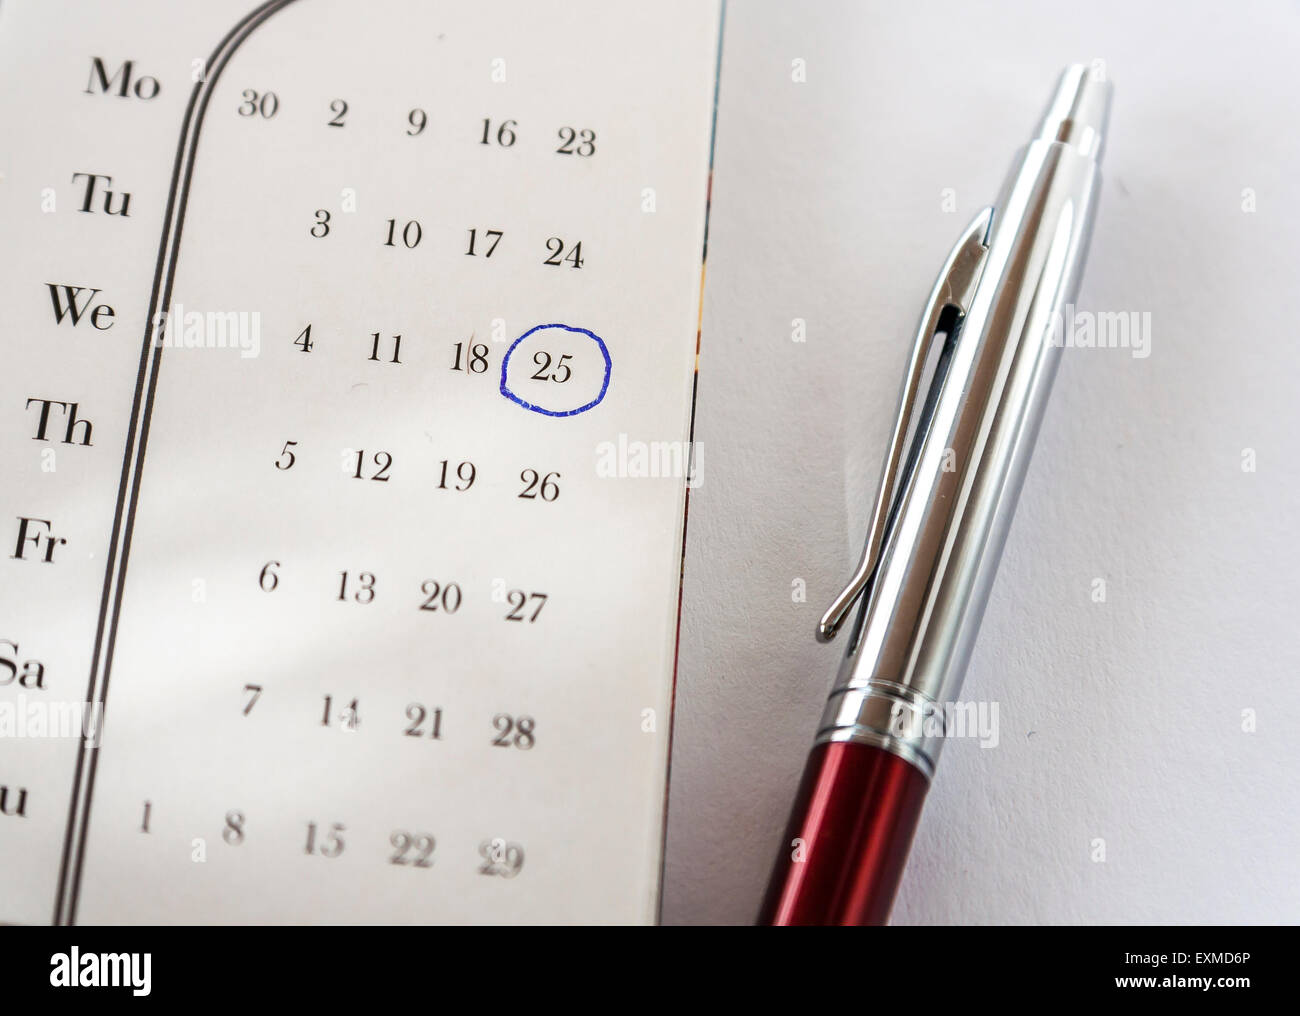 Important Date On Calendar and Pen Stock Photo